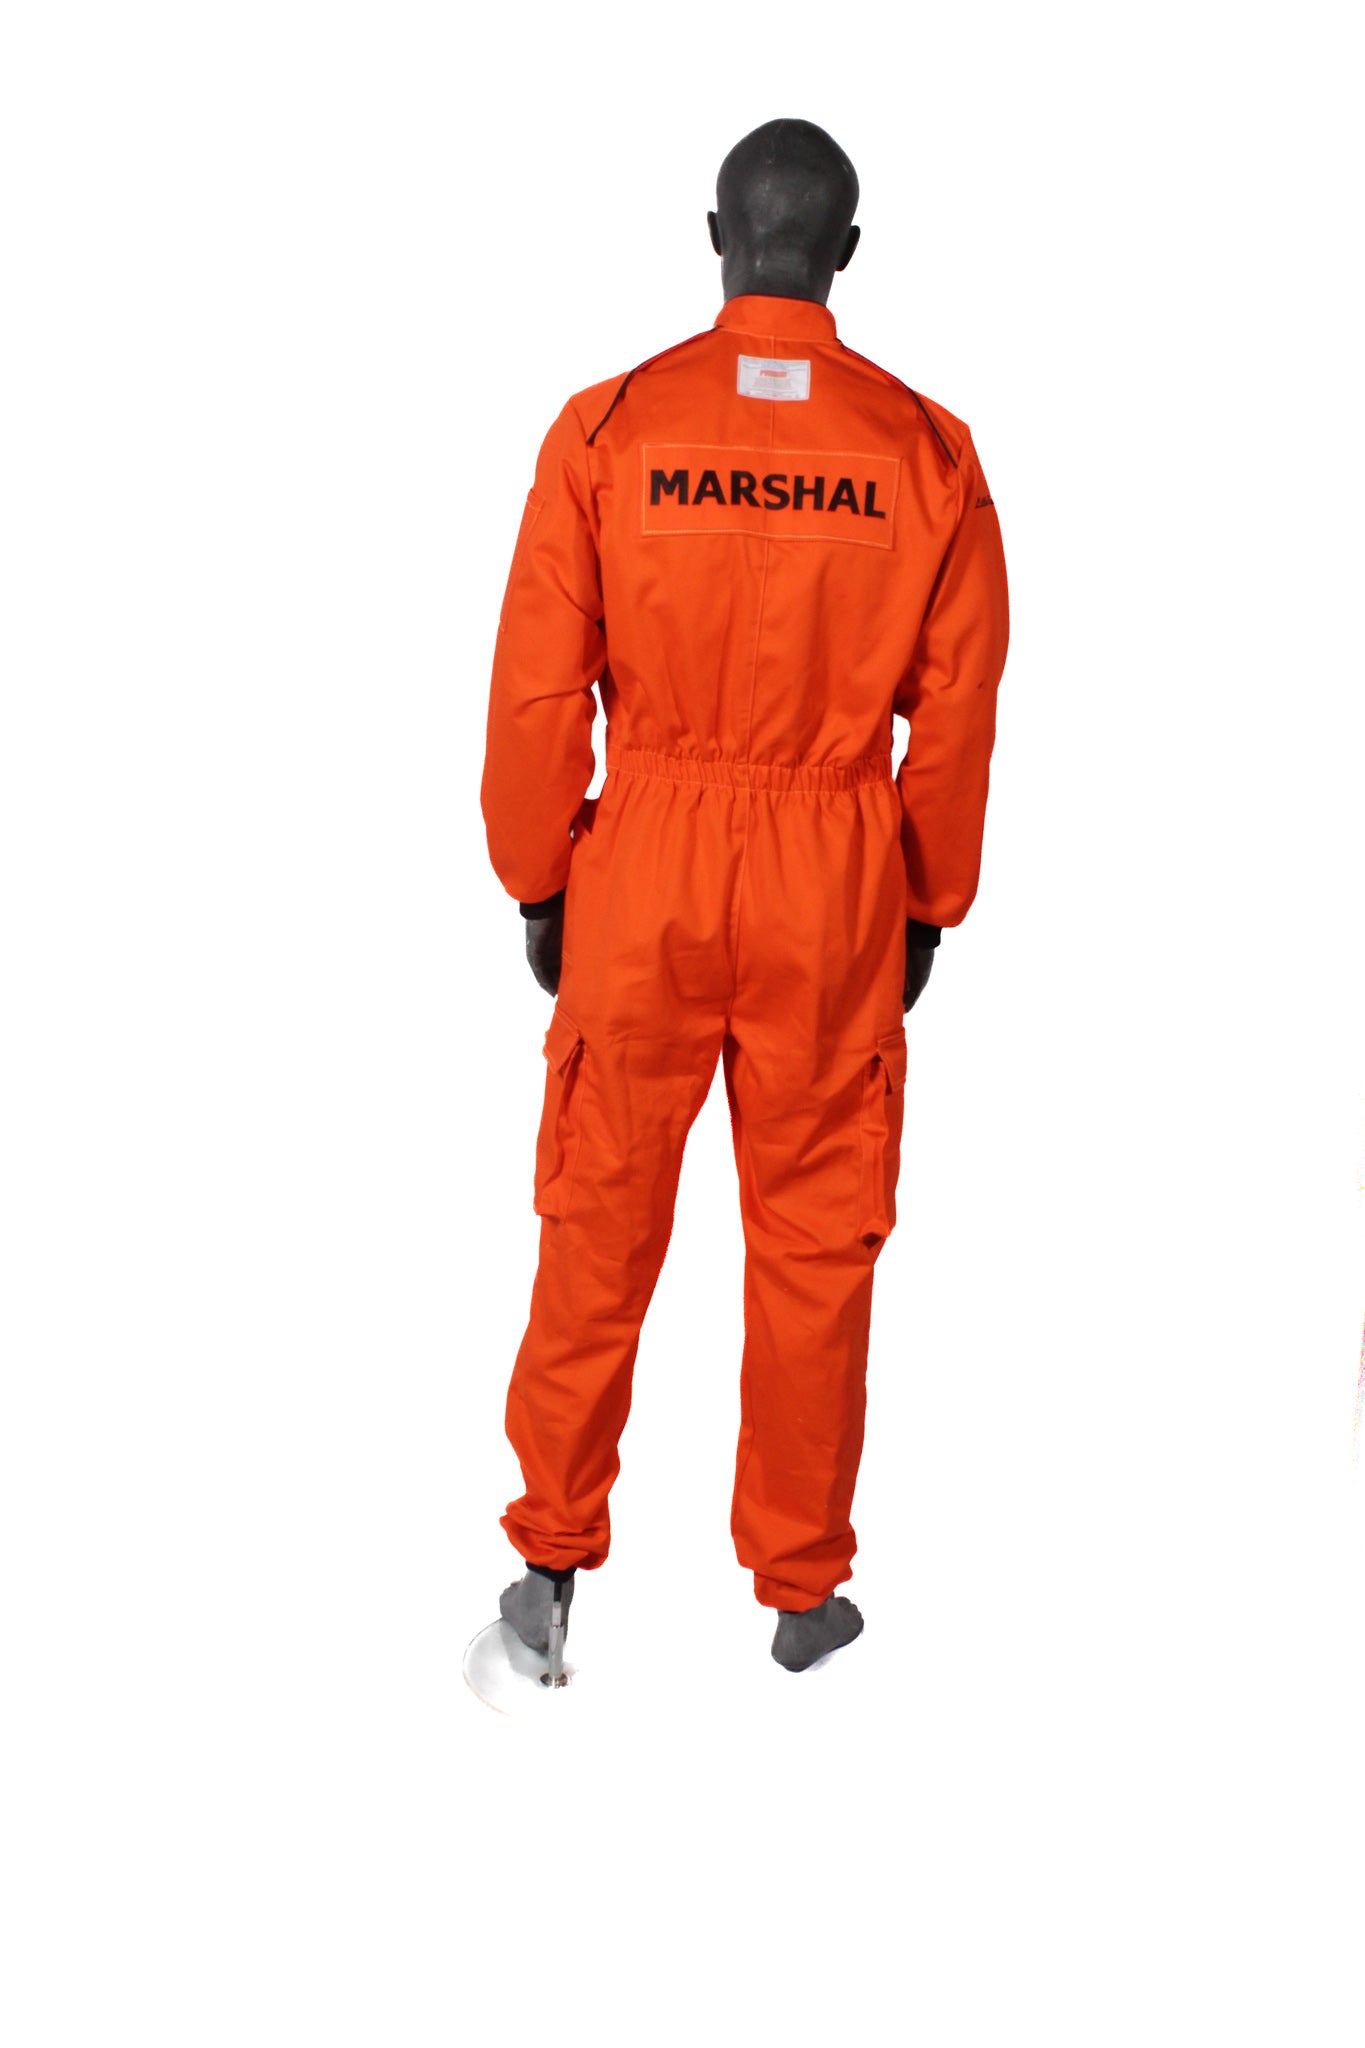 Marshal Attendant Suit - Made-to-Measure